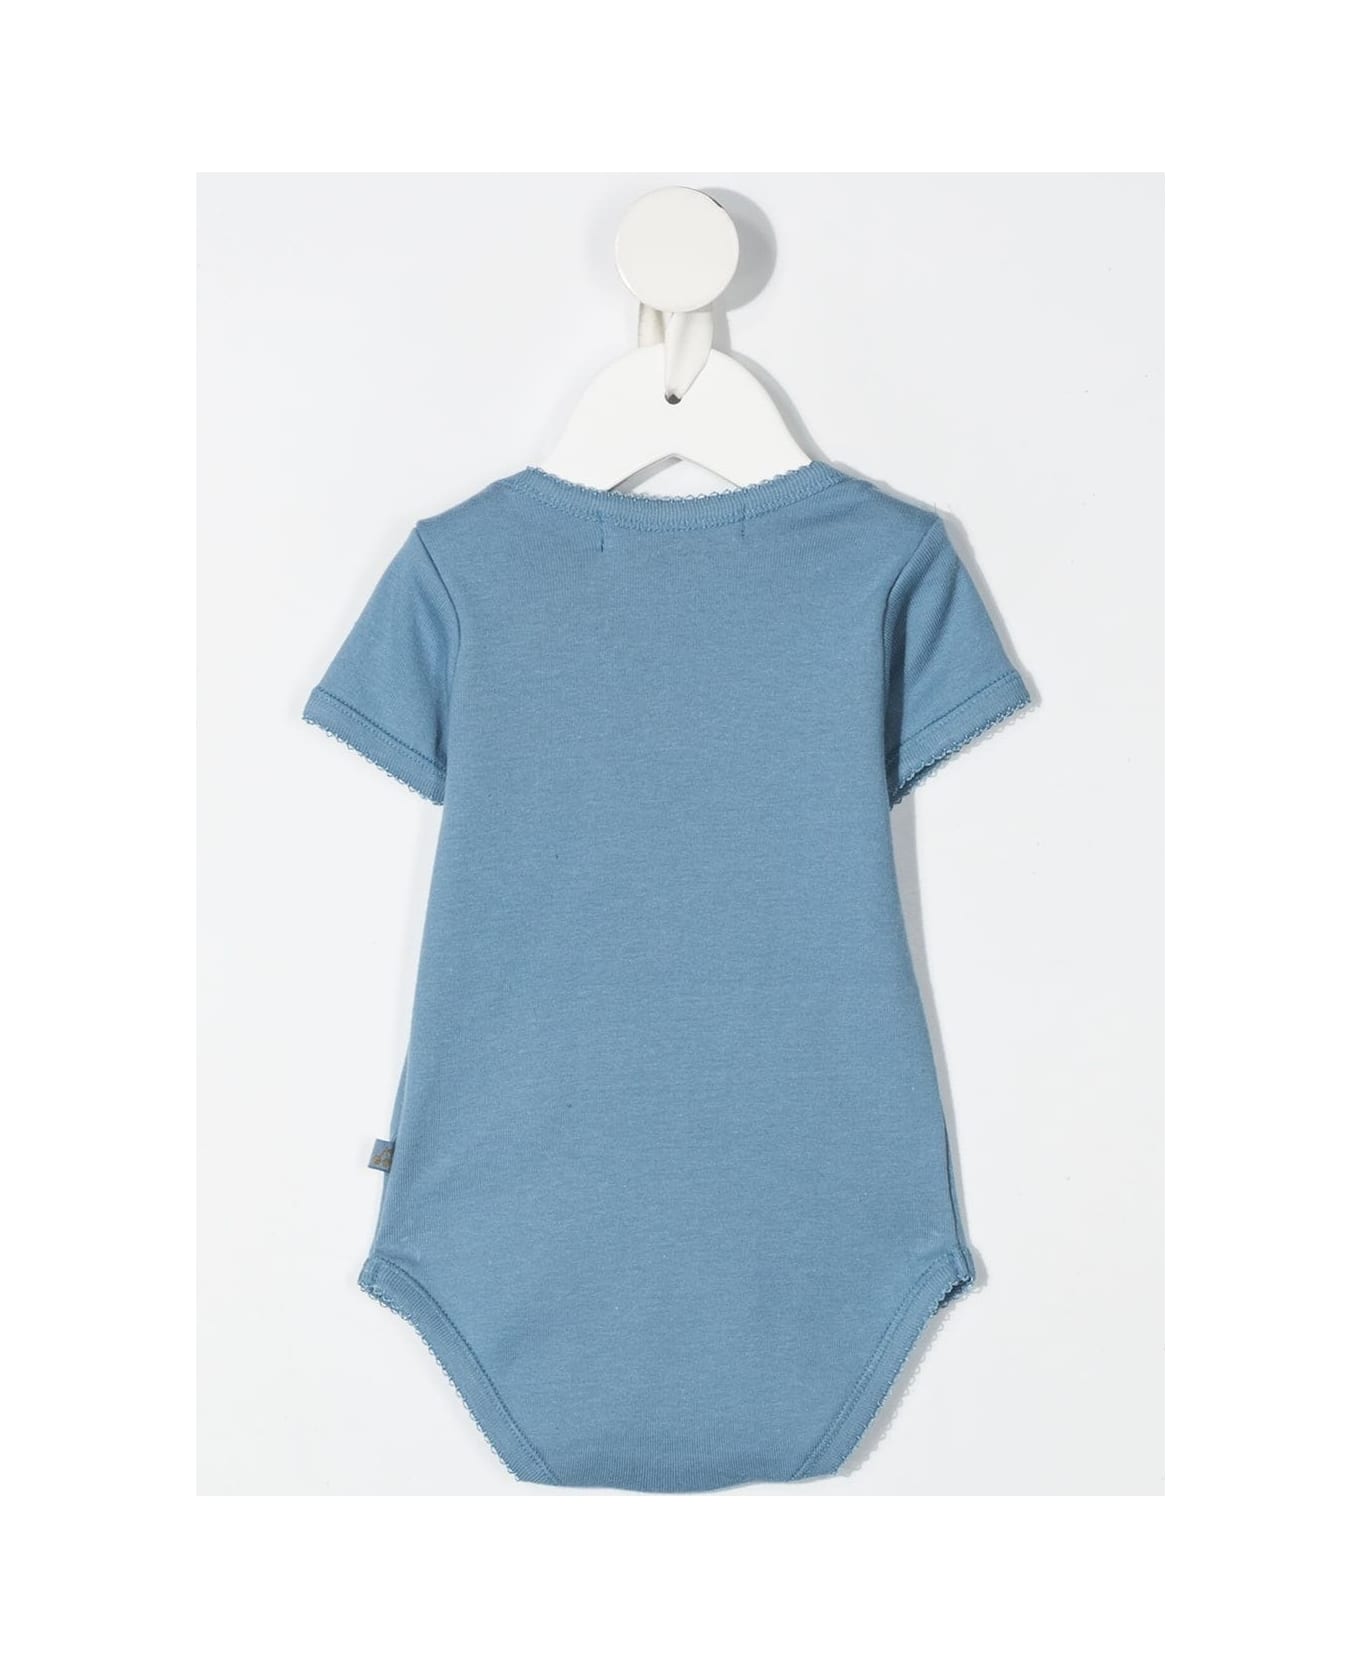 Bonpoint 3 Body Pack In Light Blue And White Cotton - Blue ボディスーツ＆セットアップ